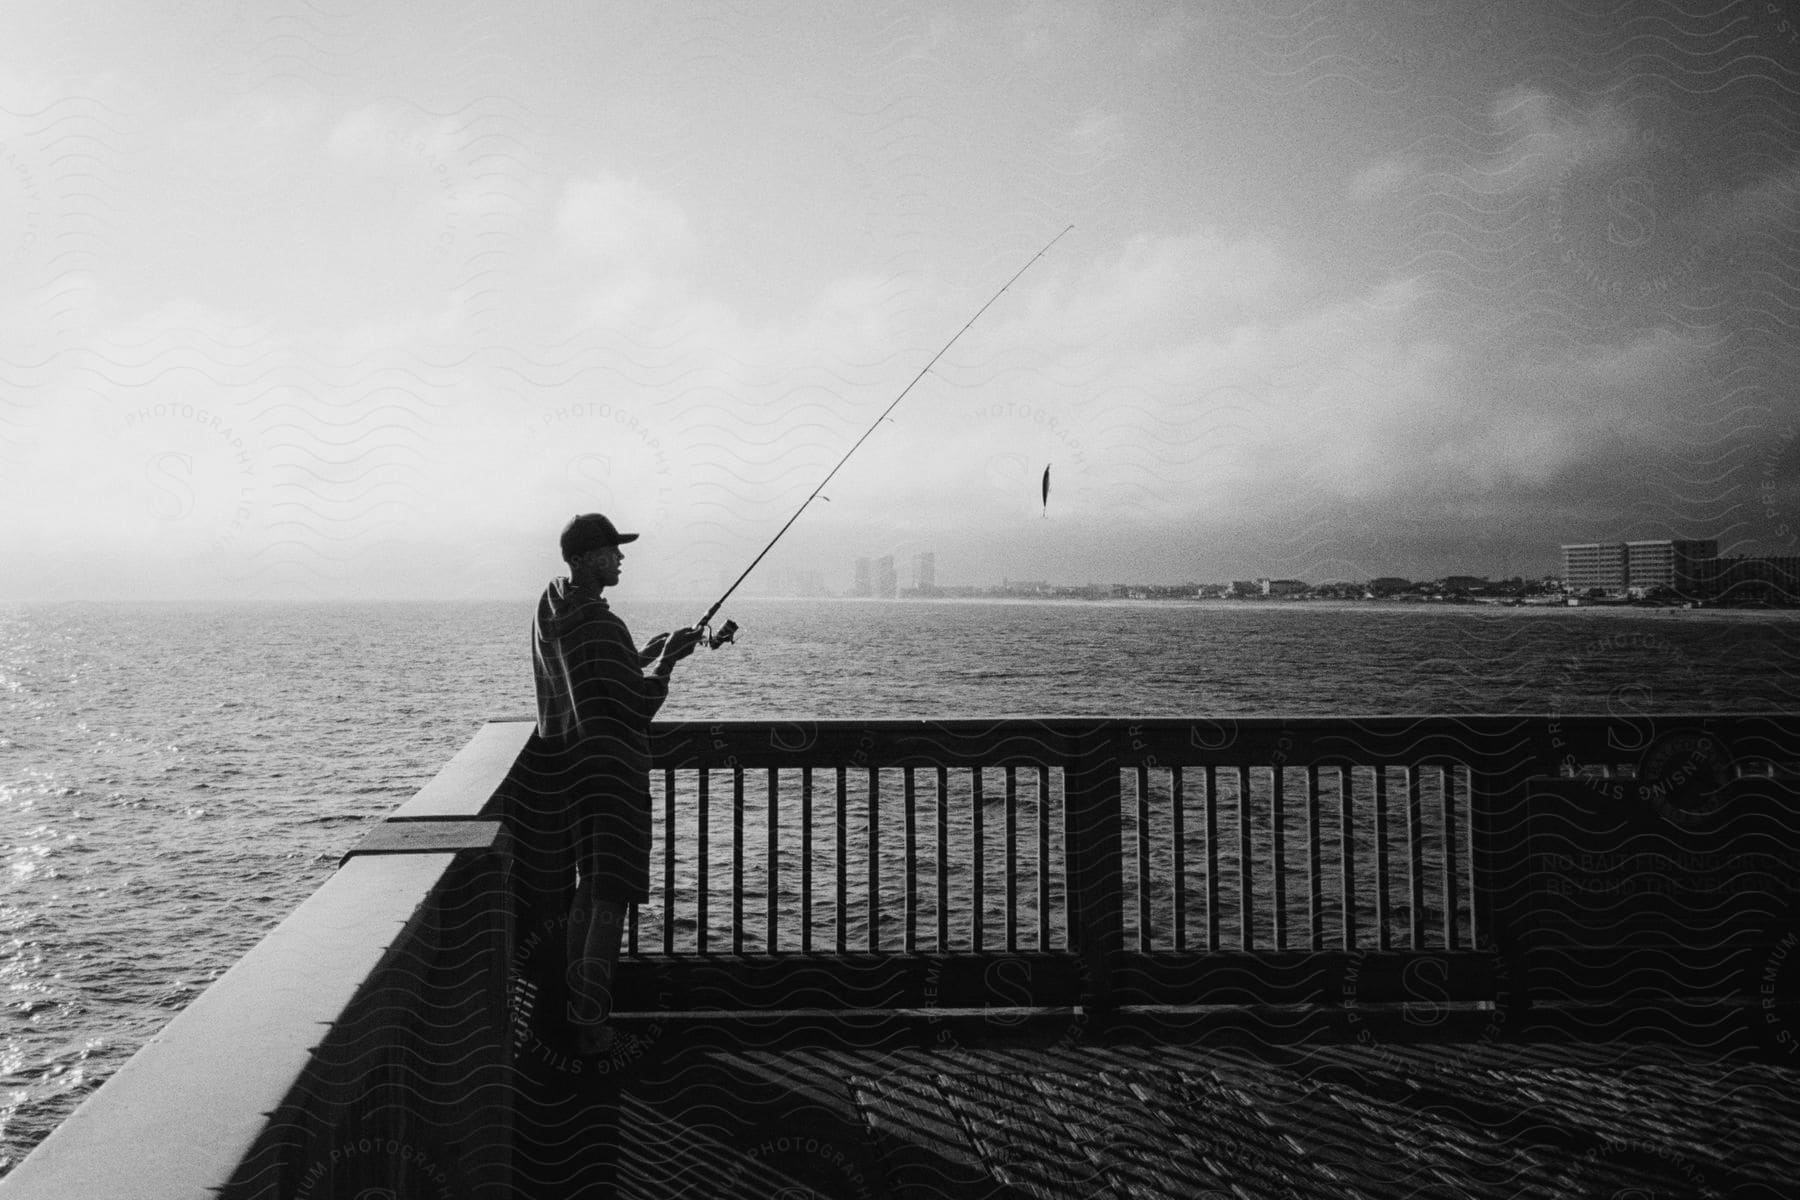 A man fishing off the side of a pier, with the ocean in front and a city skyline in the hazy background.